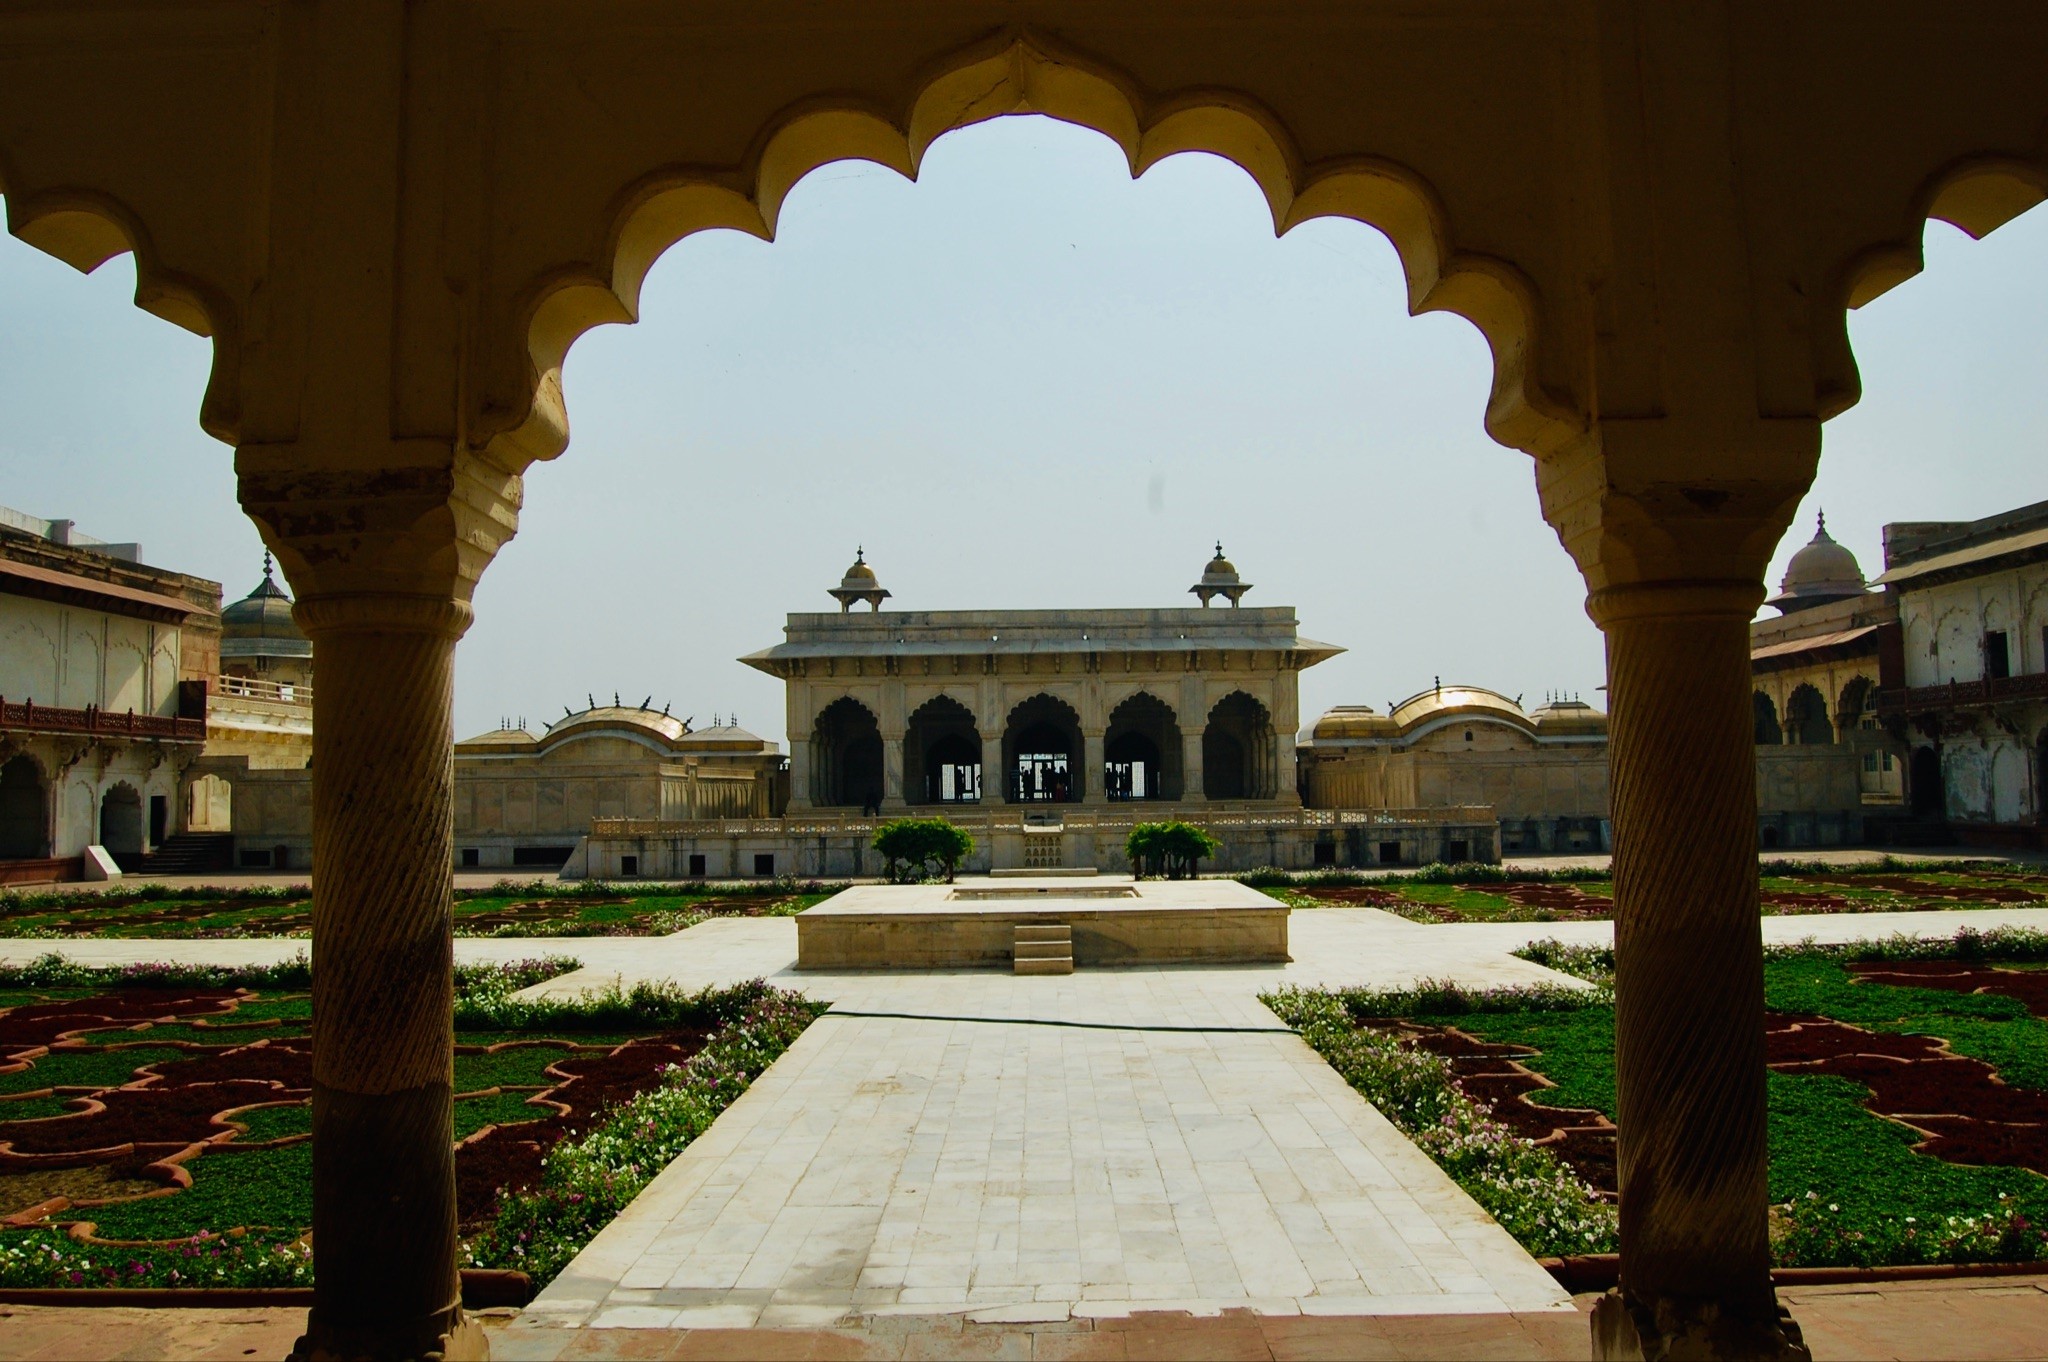 A view of the Diwan-i-Khas. Image Source: Flickr